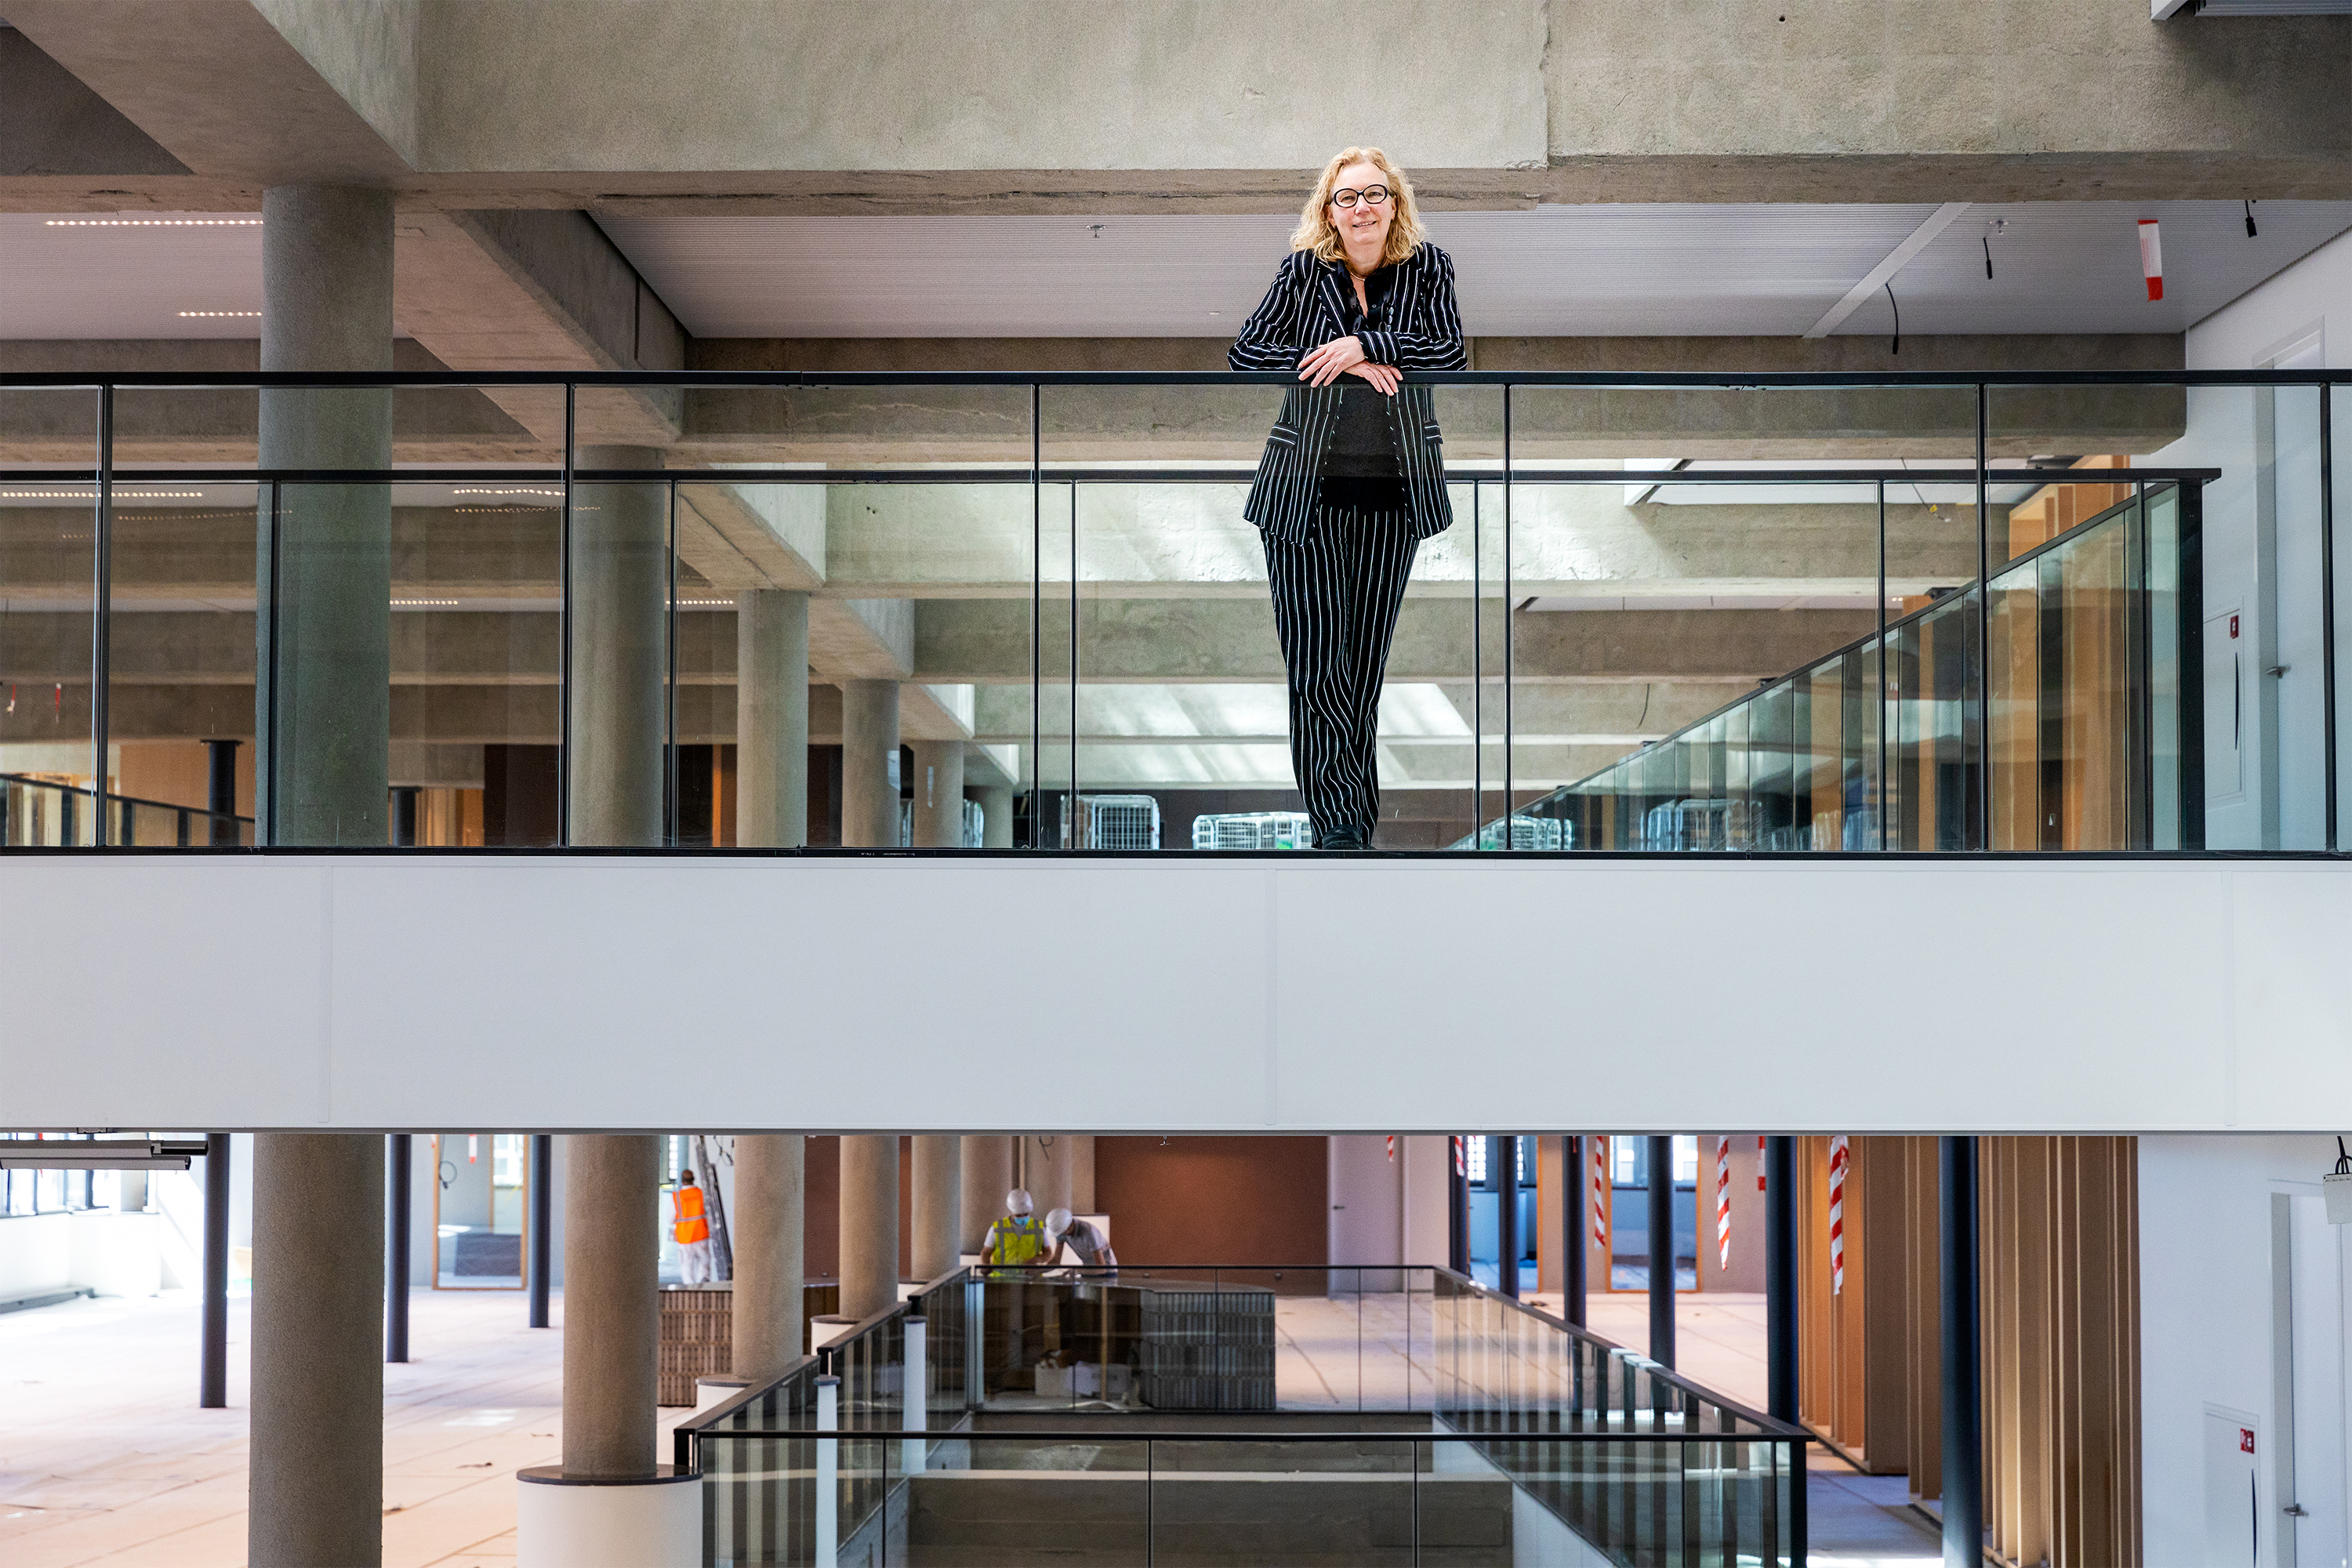 INTERVIEW: Irma van Oort on high-rise. How to create collectivity?